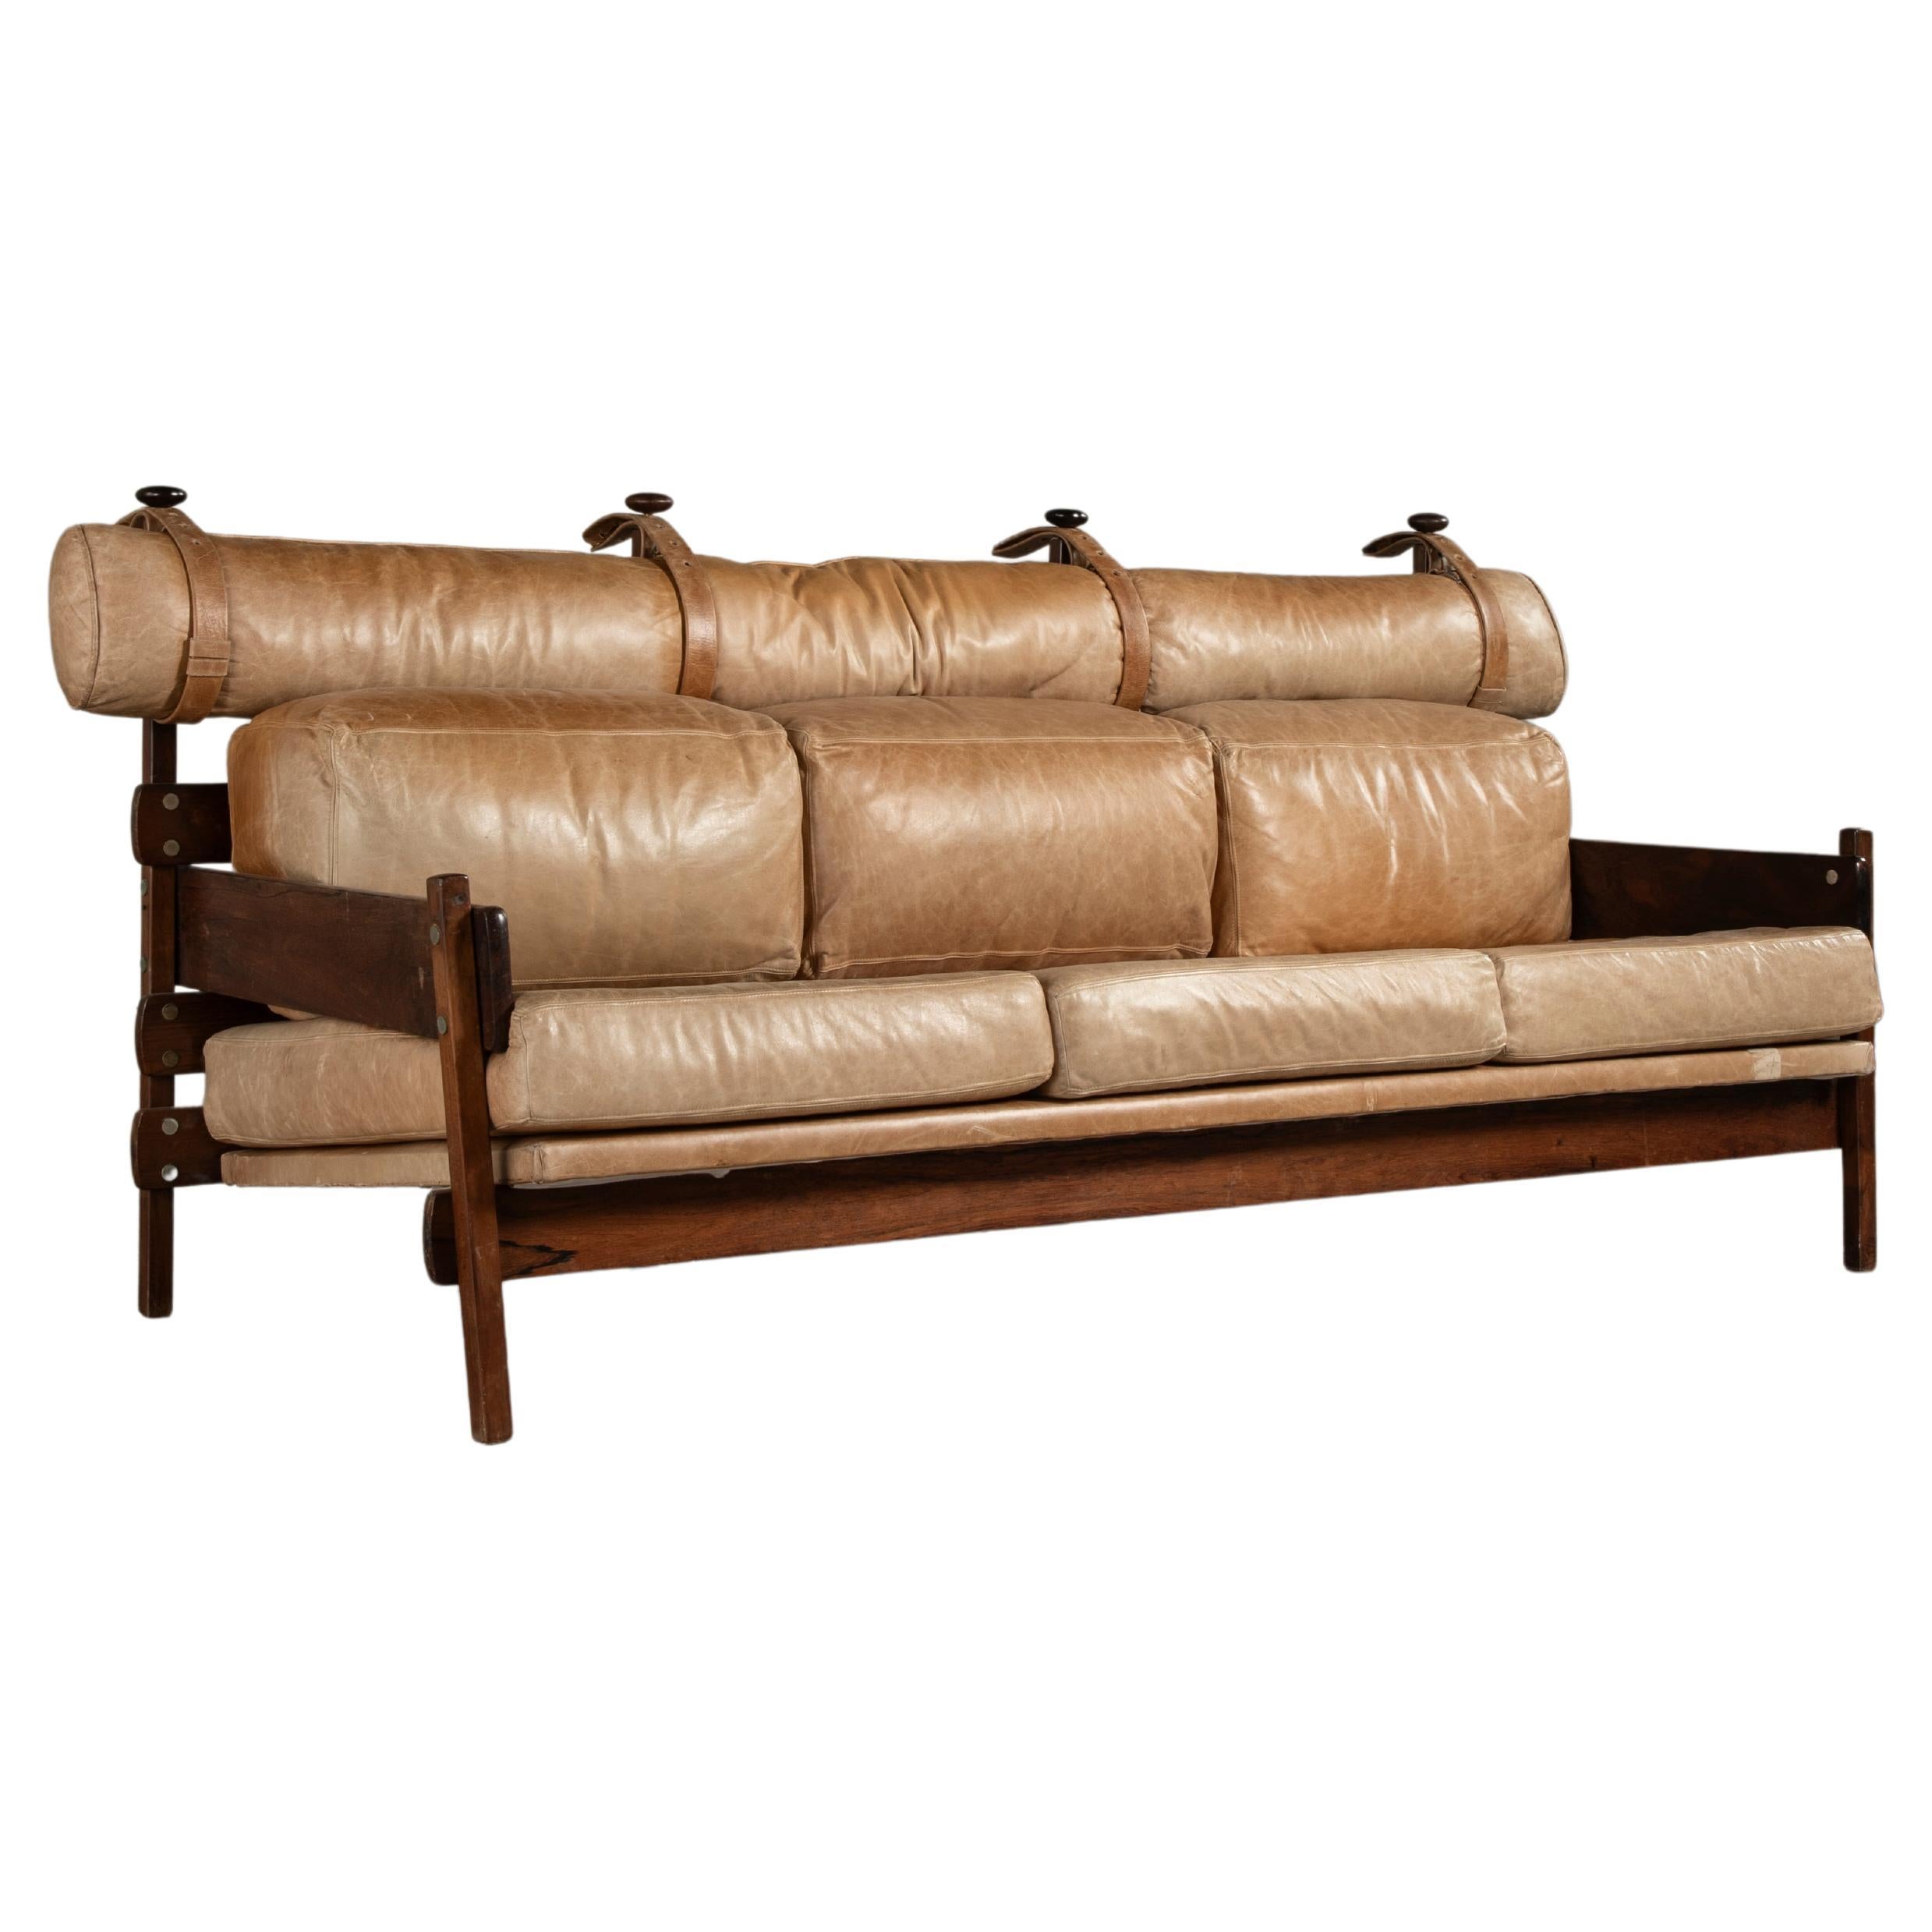 'Franco' Sofa in solid hard wood, Sérgio Rodrigues, Brazilian Mid-Century Modern For Sale